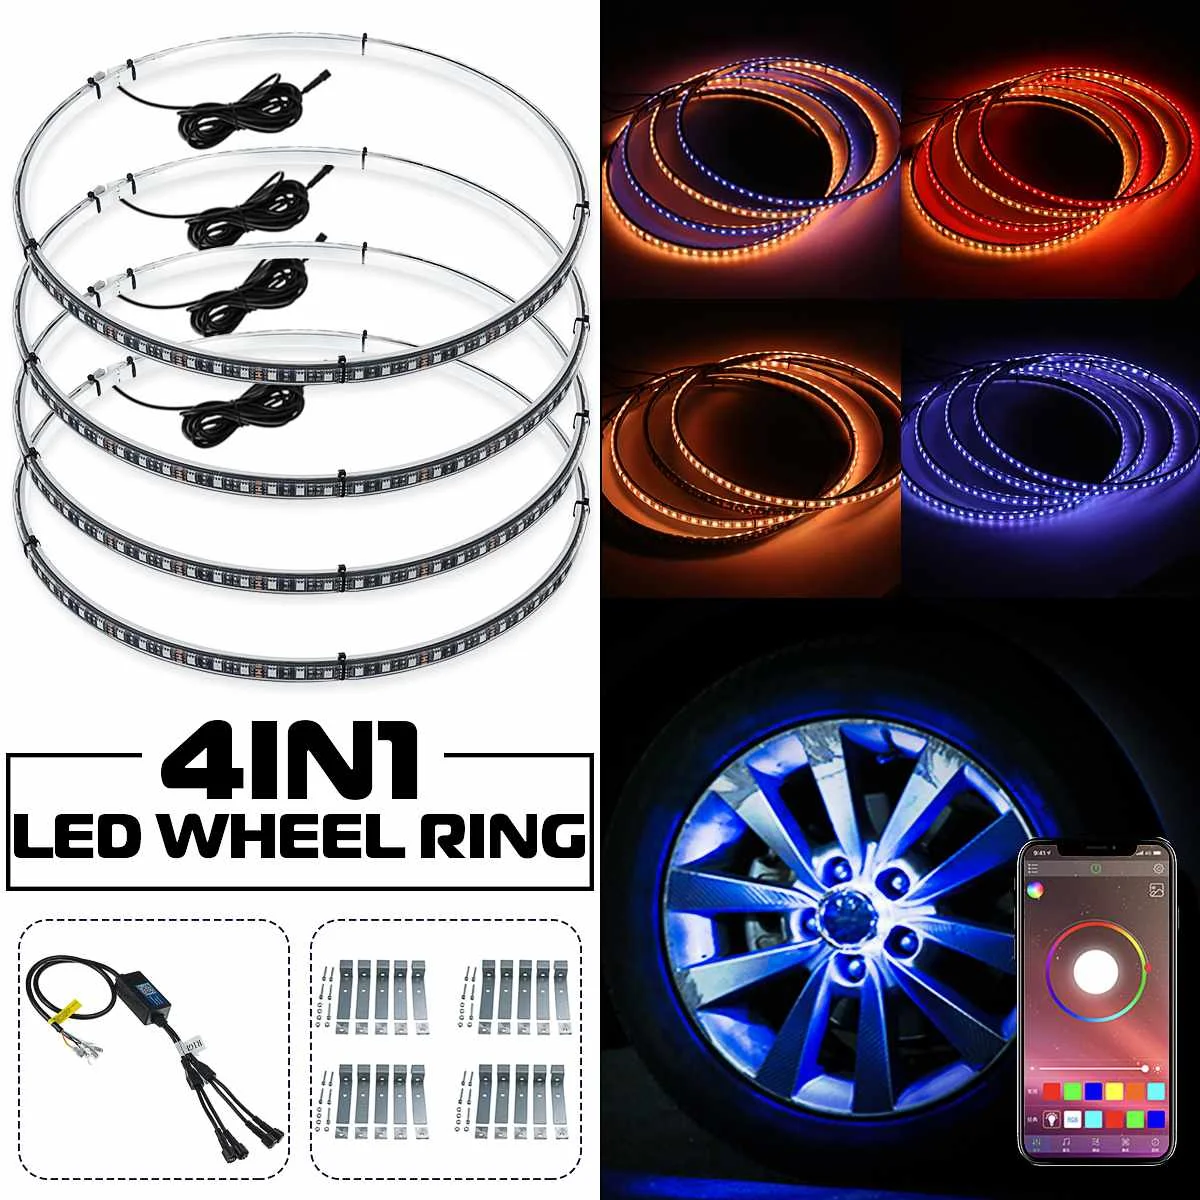 Tape Light Kit Ideal for Home A-DUDU 2019 Upgrated LED Strip Lights Room Kitchen Party Multi-Color Changing with 44 Key IR Remote 32.8ft 300LEDs SMD 5050 RGB Waterproof Flexible LED Rope Lights